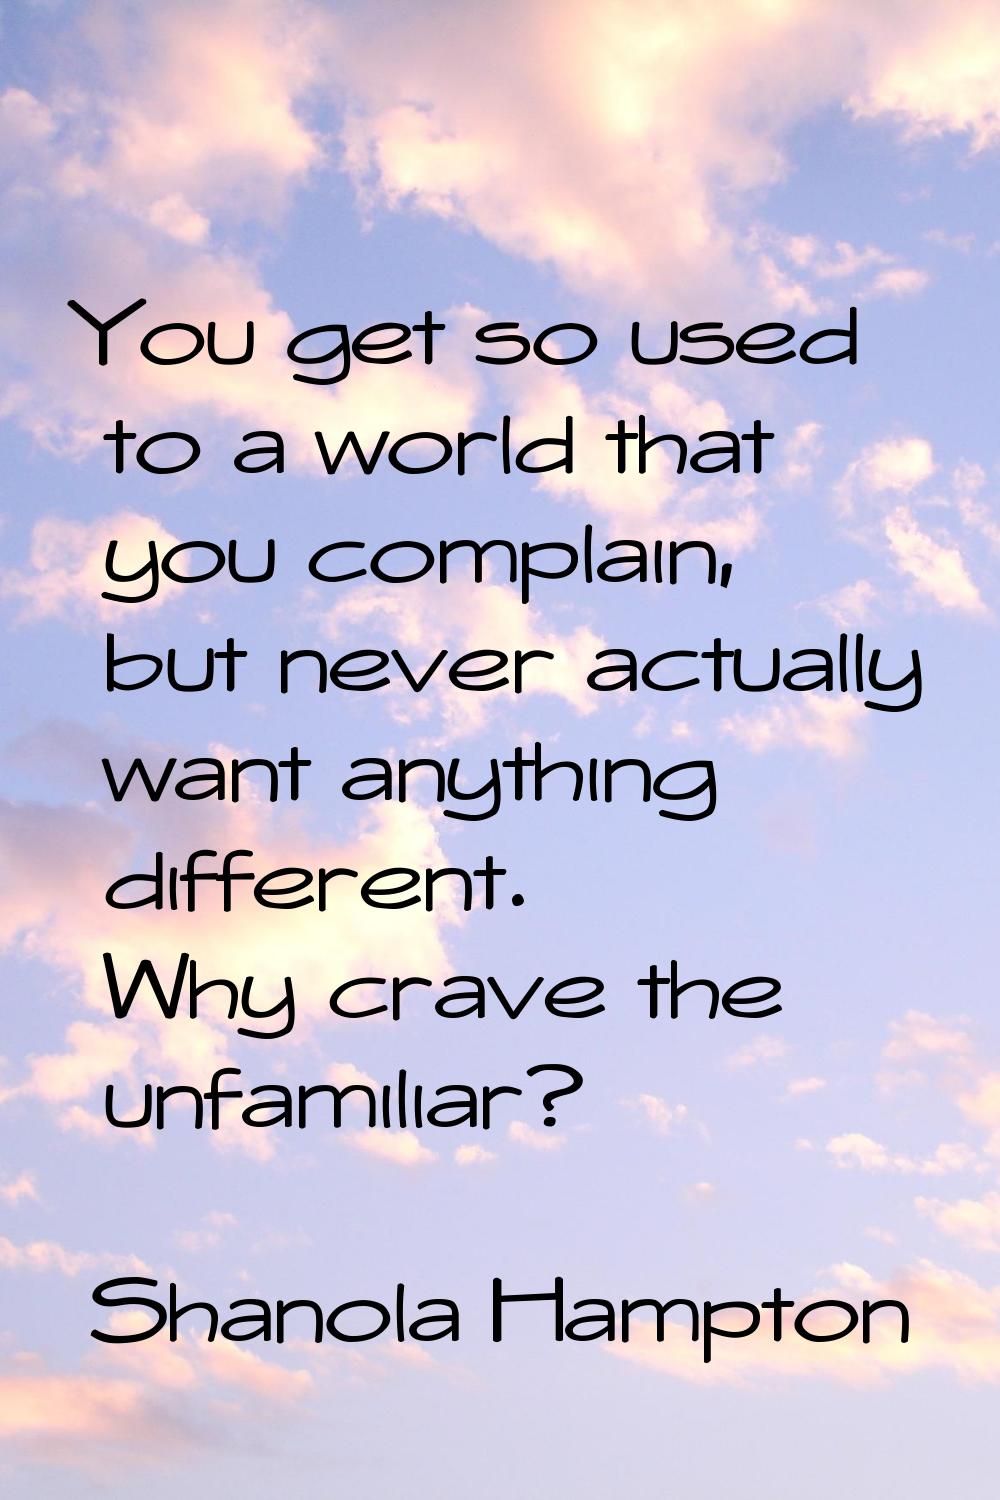 You get so used to a world that you complain, but never actually want anything different. Why crave